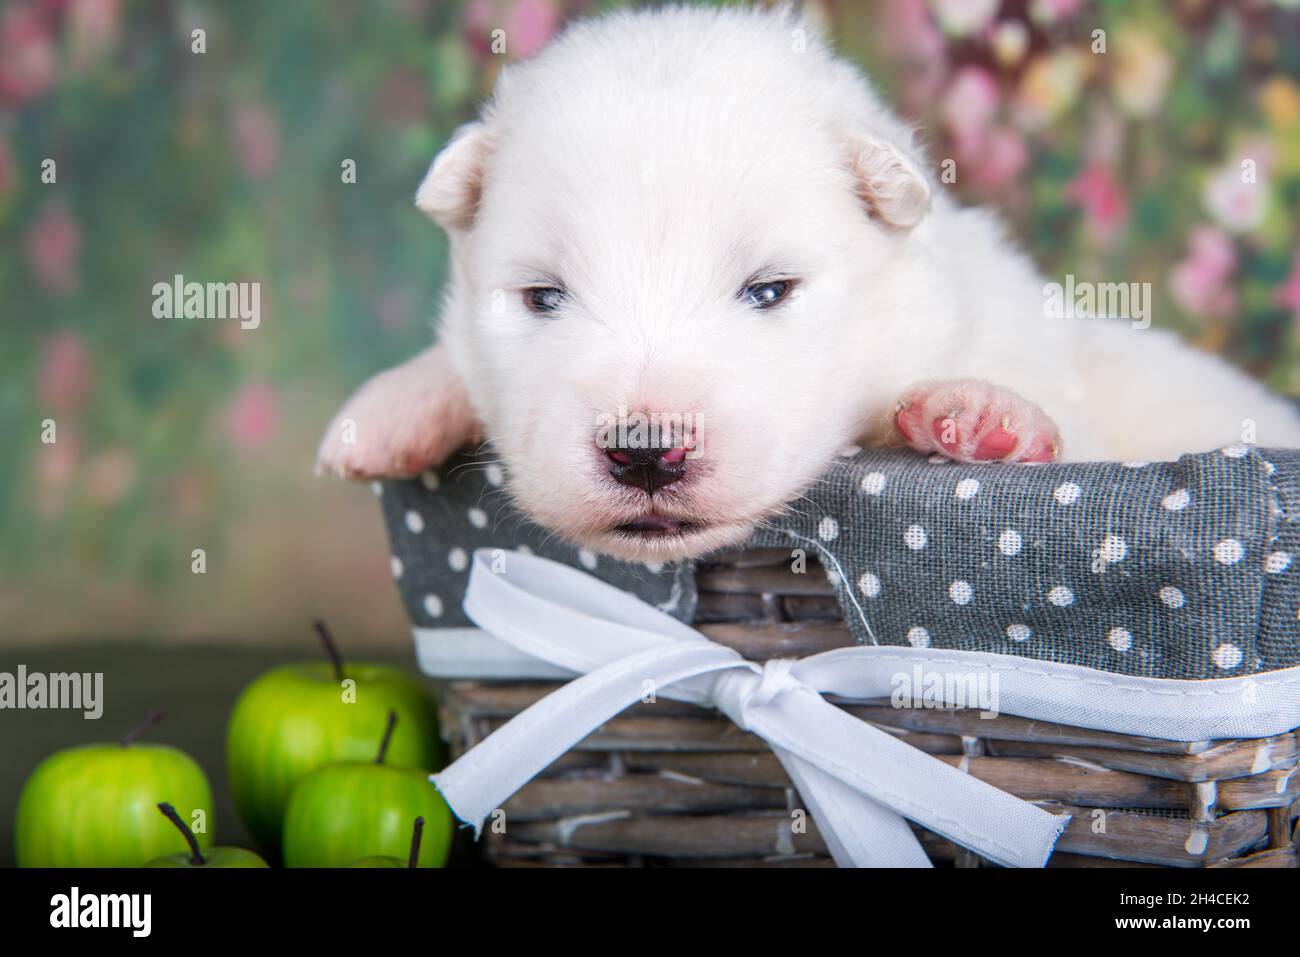 White fluffy small Samoyed puppy dog in a basket with apples Stock Photo